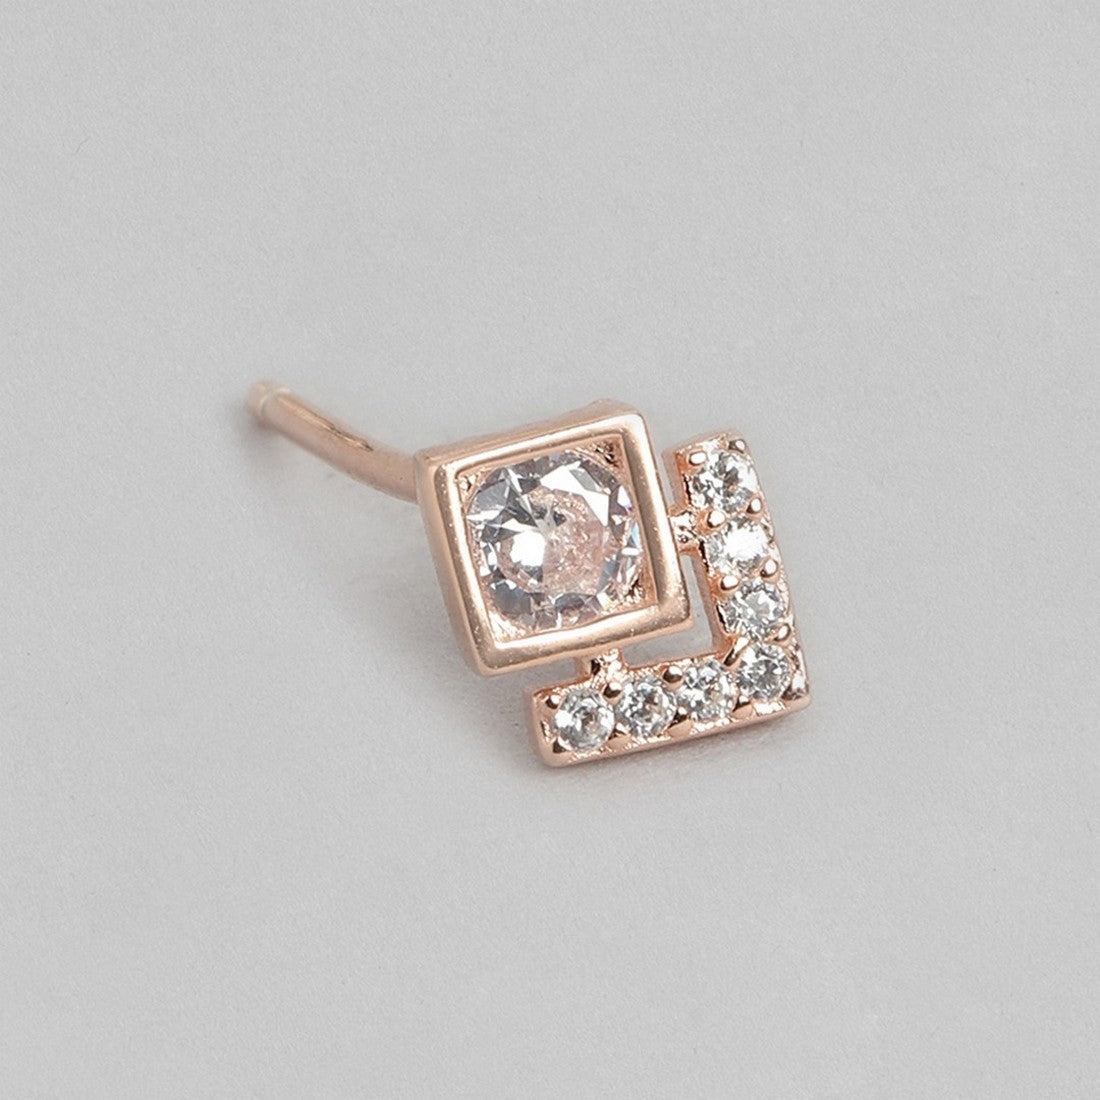 Classy CZ Studded Rose Gold Plated 925 Sterling Silver Stud Earrings